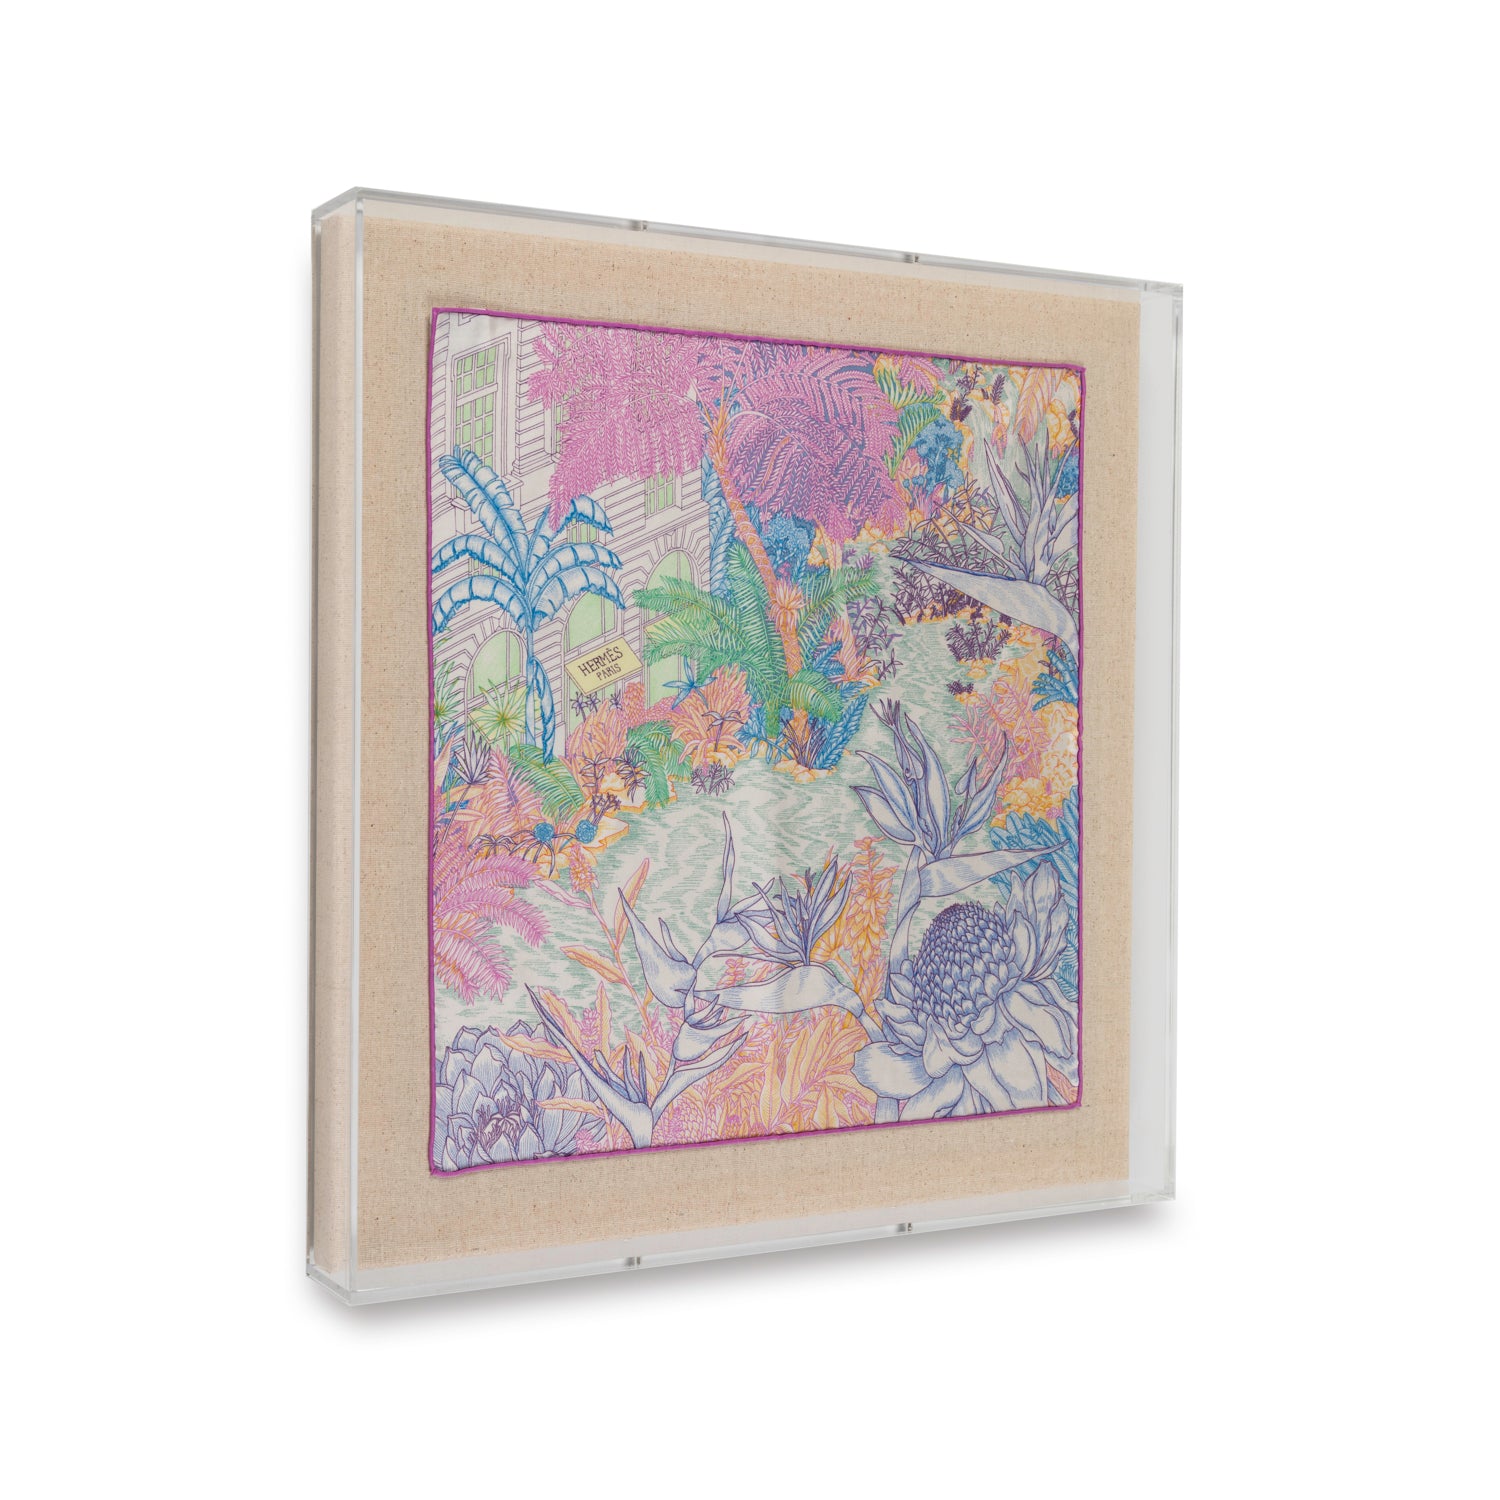 Framed Hermés Silk Faubourg Tropical Rose Blue Scarf in a 20x20x2